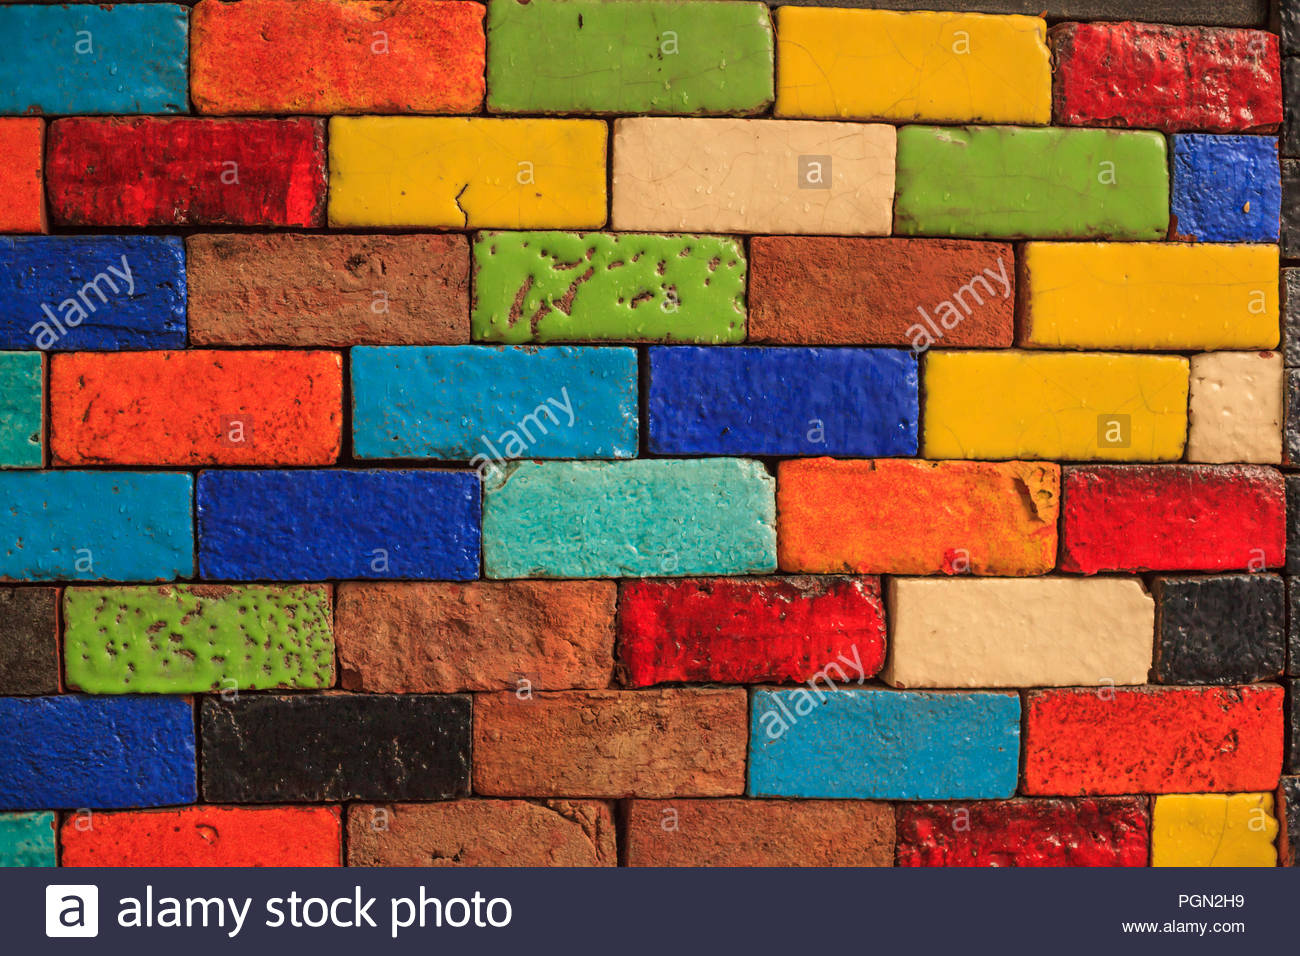 Abstract Aged Multicolored Painted Baked Earthen Clay Brick Blocks